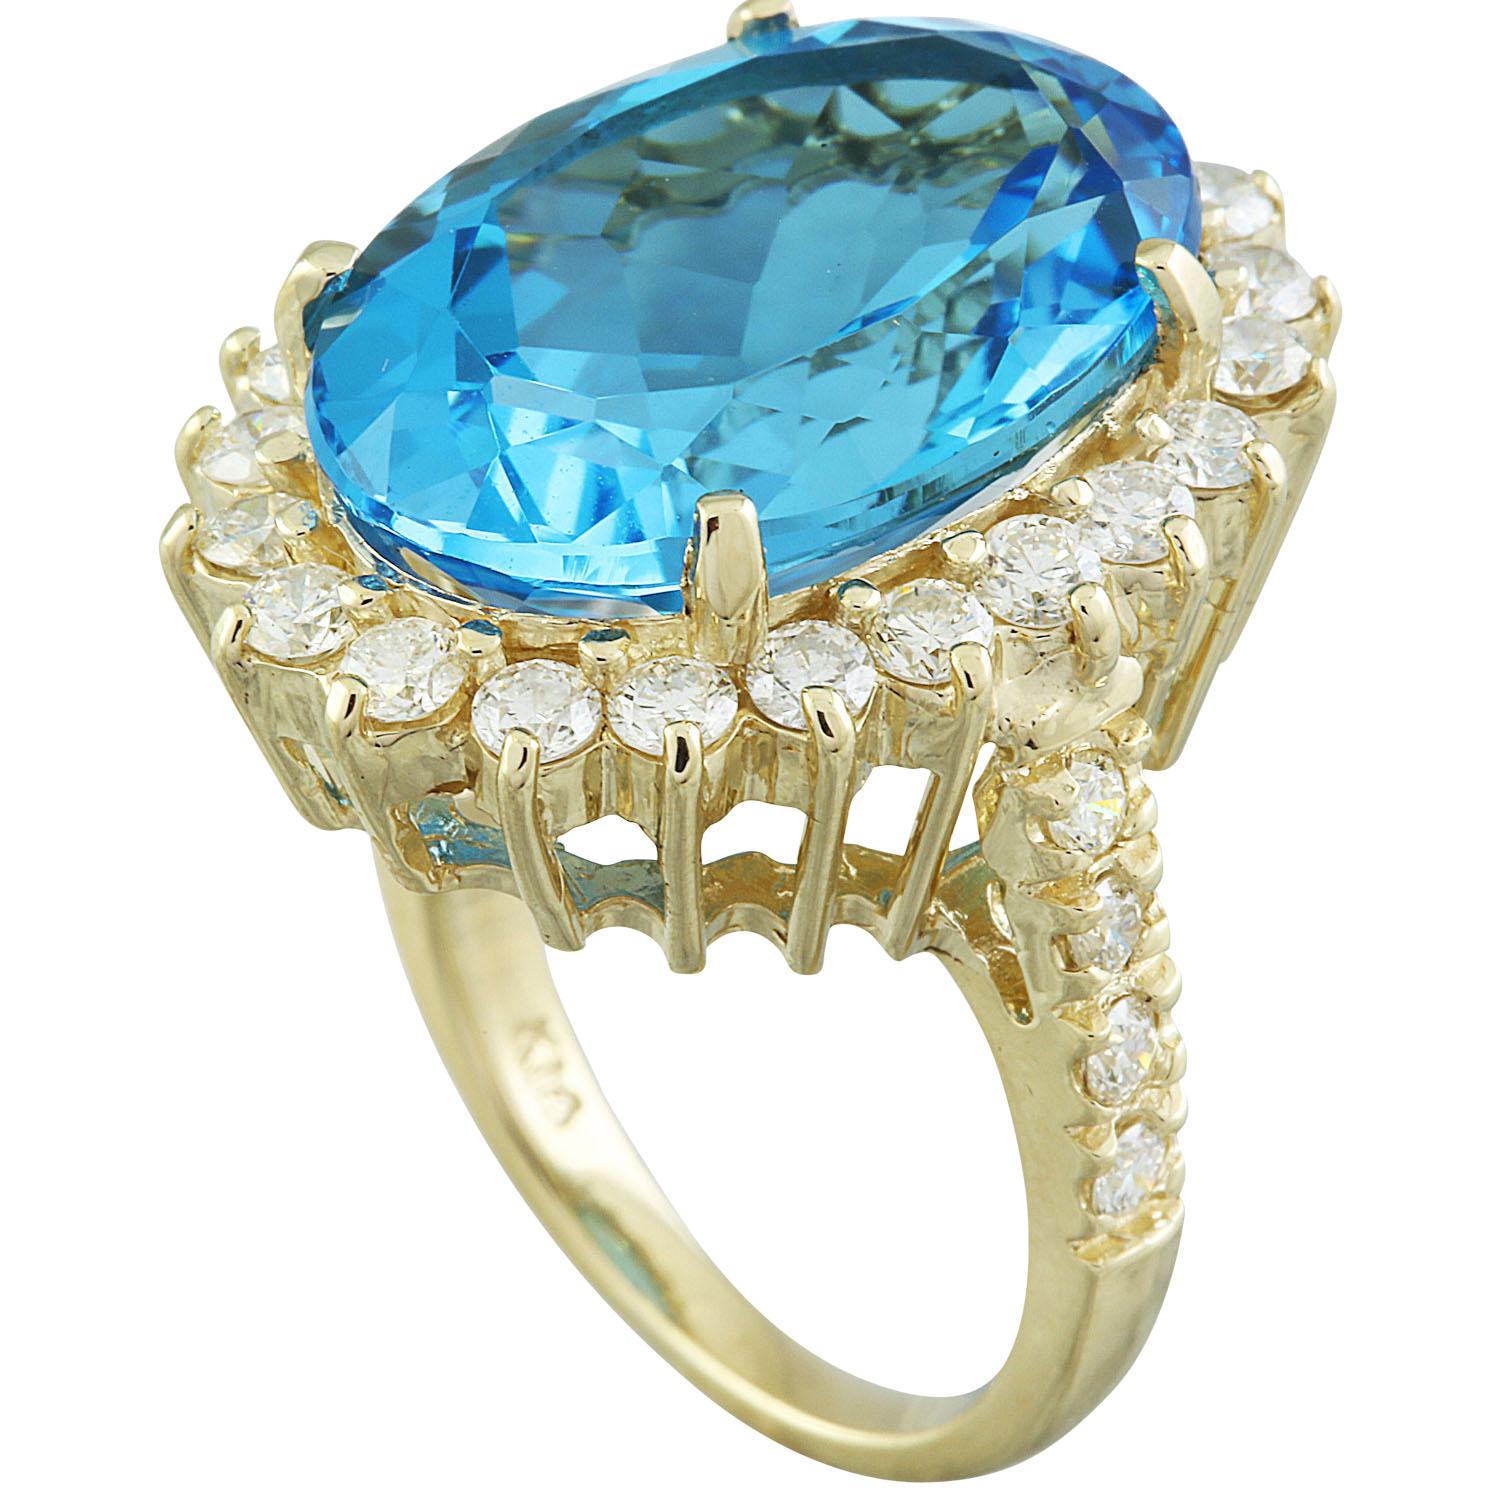 13.00 Carat Natural Topaz 14 Karat Solid Yellow Gold Diamond Ring
Stamped: 14K 
Total Ring Weight: 10 Grams 
Topaz Weight 11.70 Carat (16.00x12.00 Millimeters)
Diamond Weight: 1.30 carat (F-G Color, VS2-SI1 Clarity )
Quantity: 30 
Face Measures: